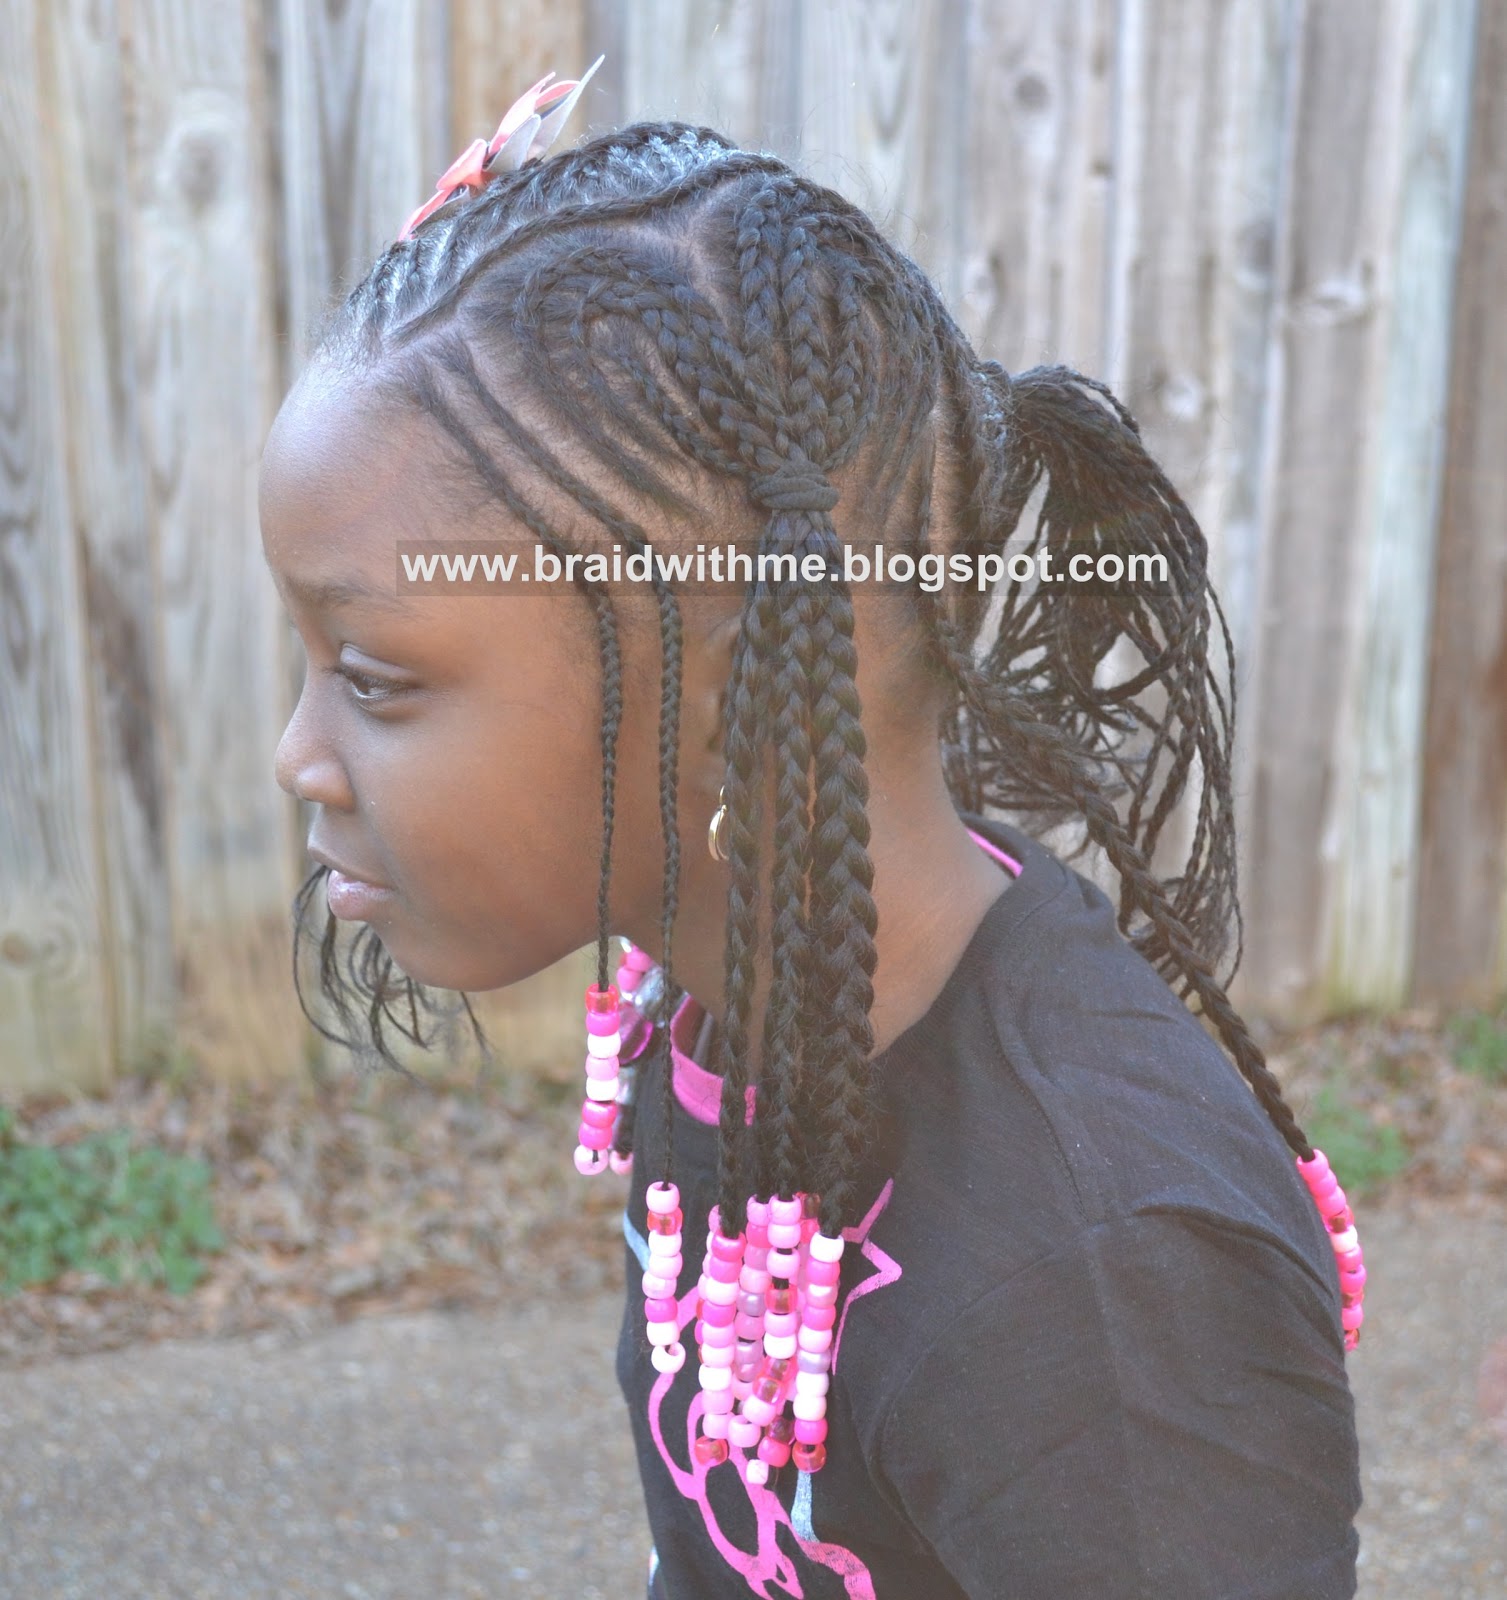 Braided Hairstyles For Black Women With Natural Hair Friday, February 17, 2012